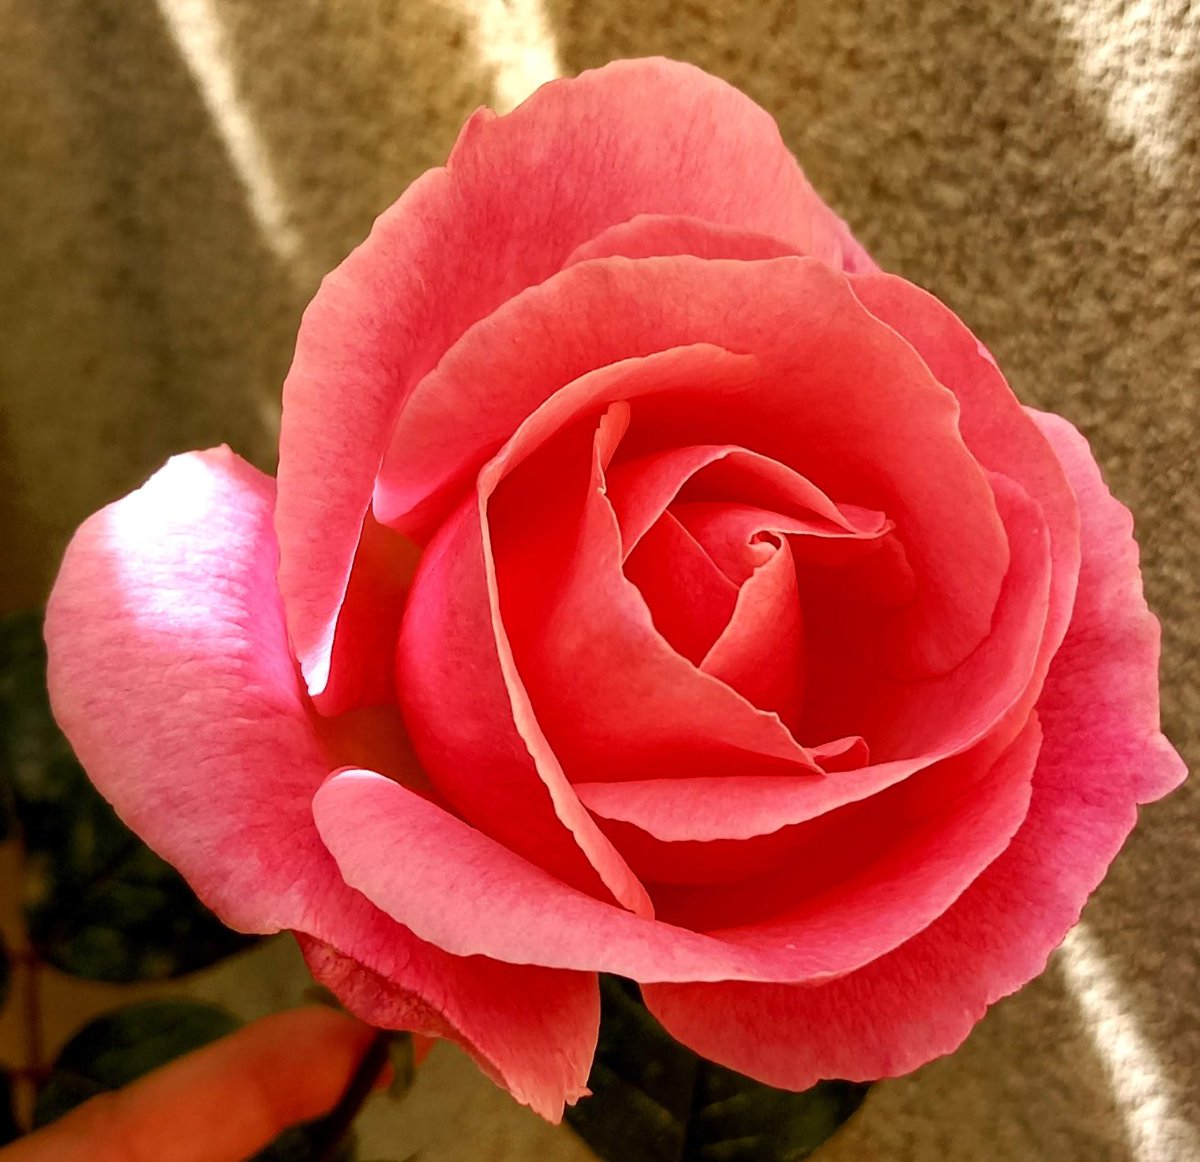 @DailyPicTheme2 The #understated beauty of a single rose